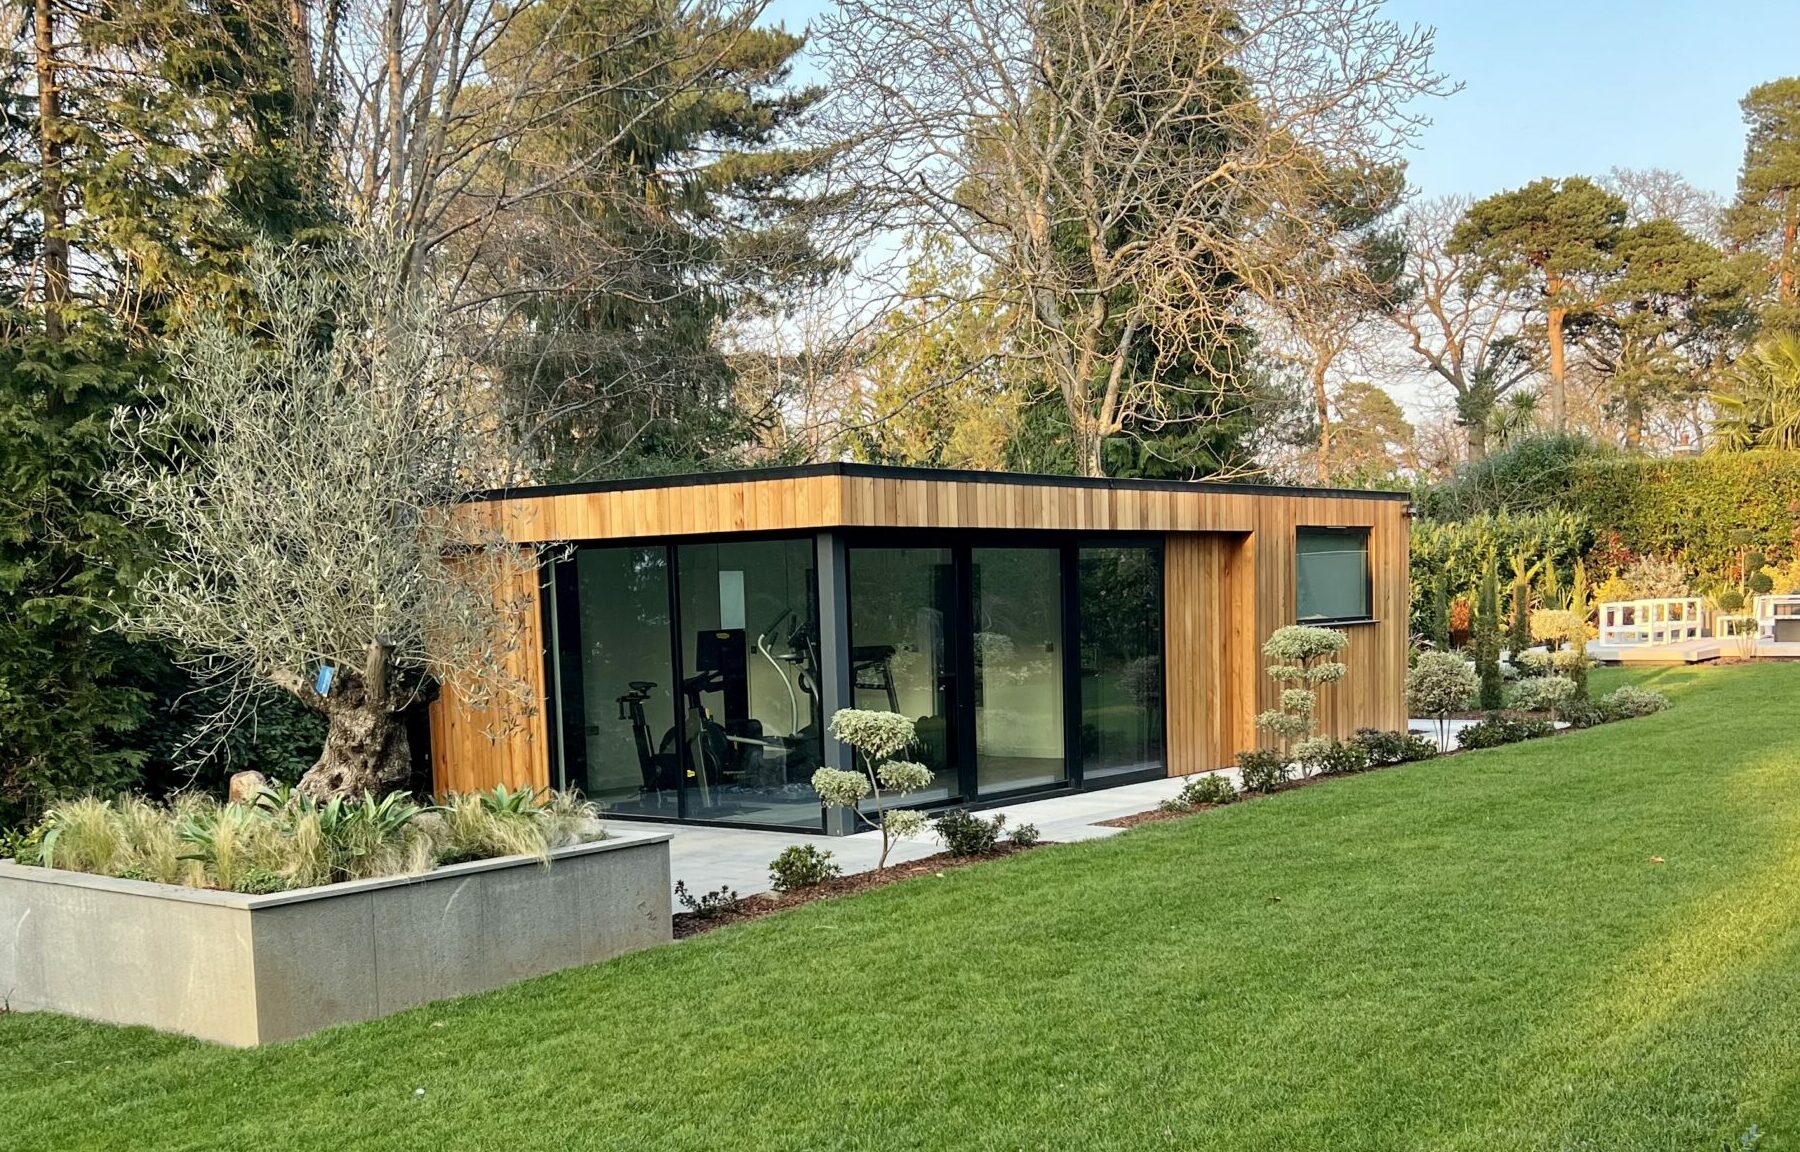 Exterior view of a Vivid Green garden gym with western red cedar cladding, a flat roof, aluminium grey framed corner glass sliding doors, surrounded by a tiled patio, trees in the background, and lush foliage